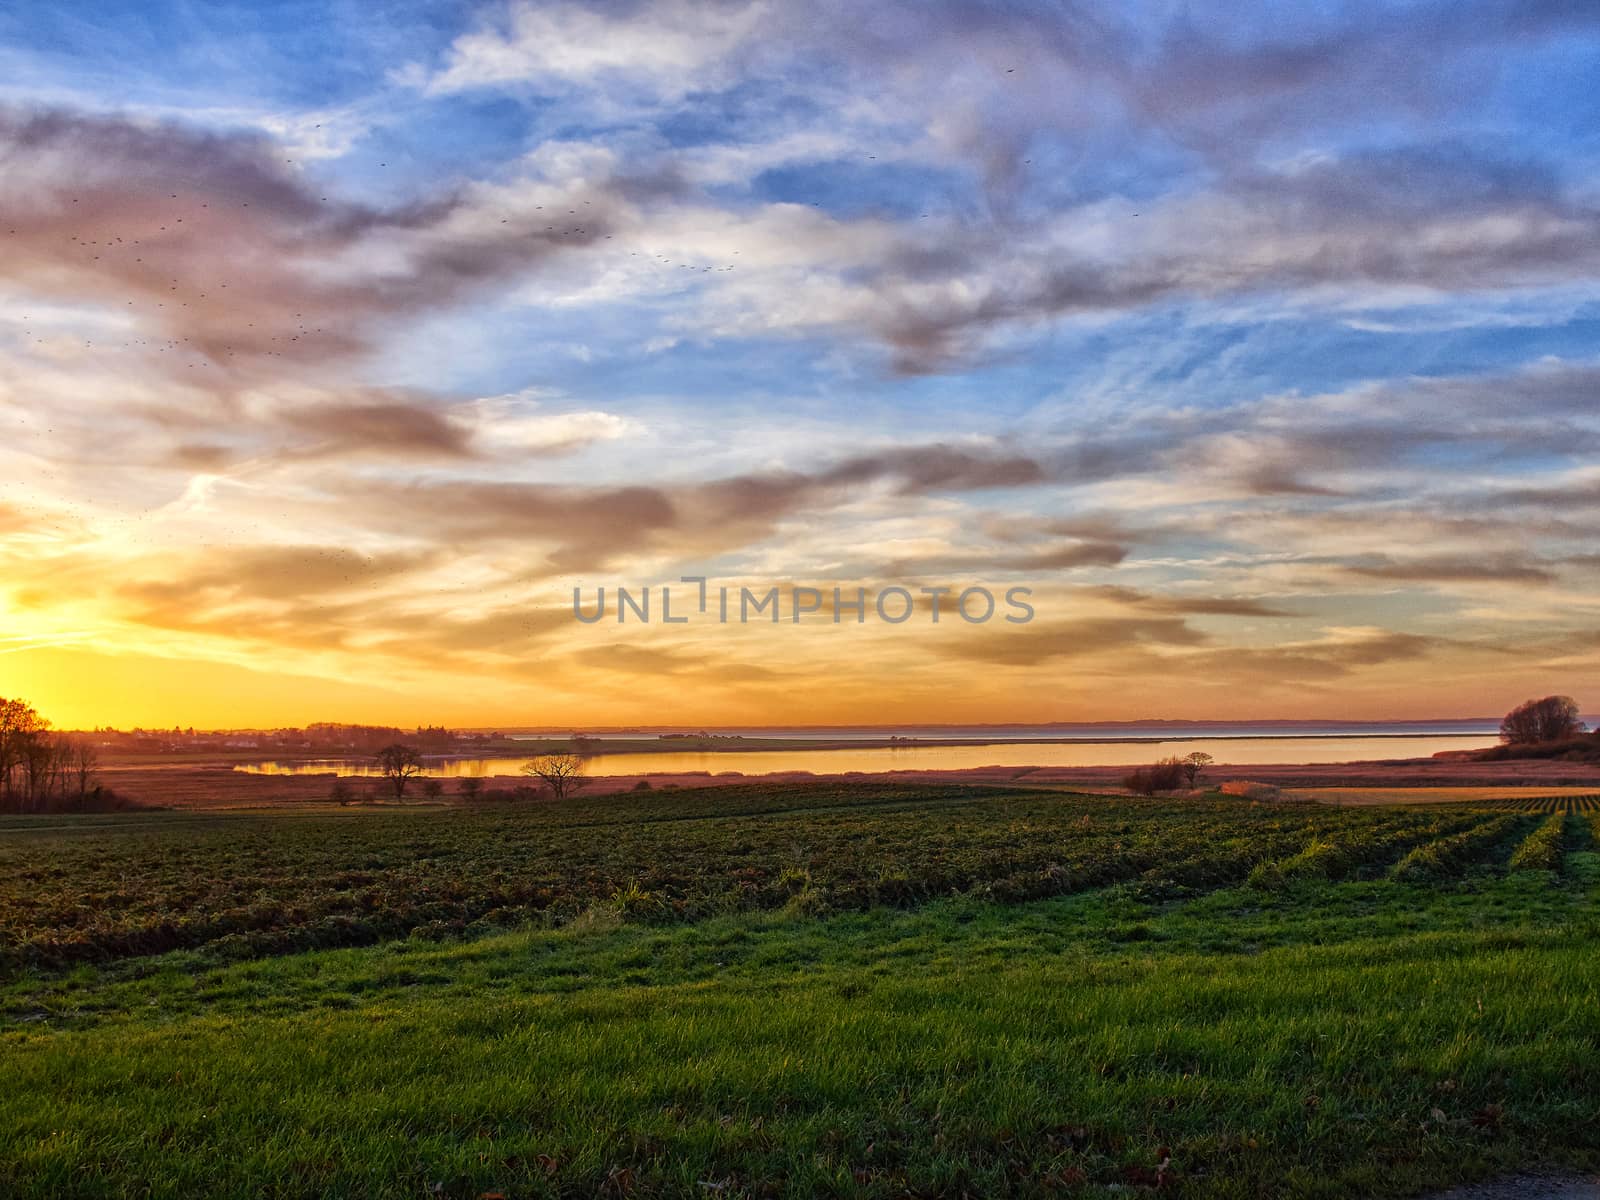 Landscape of green fields and a dramatic sunset by Ronyzmbow